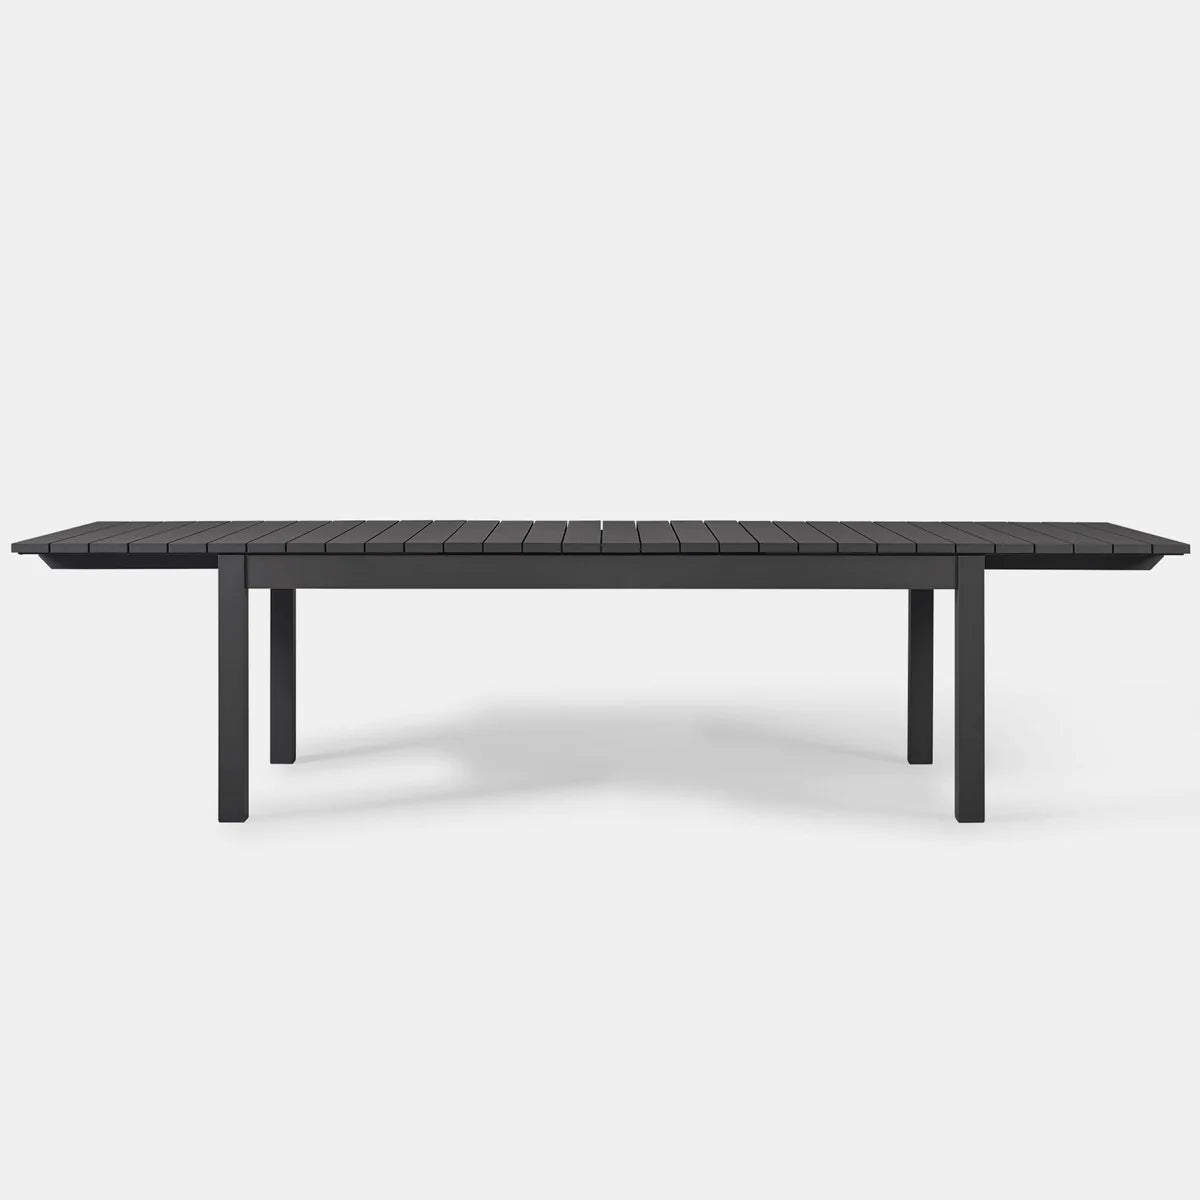 PACIFIC EXTENDABLE DINING TABLE ALUMINUM ASTEROID